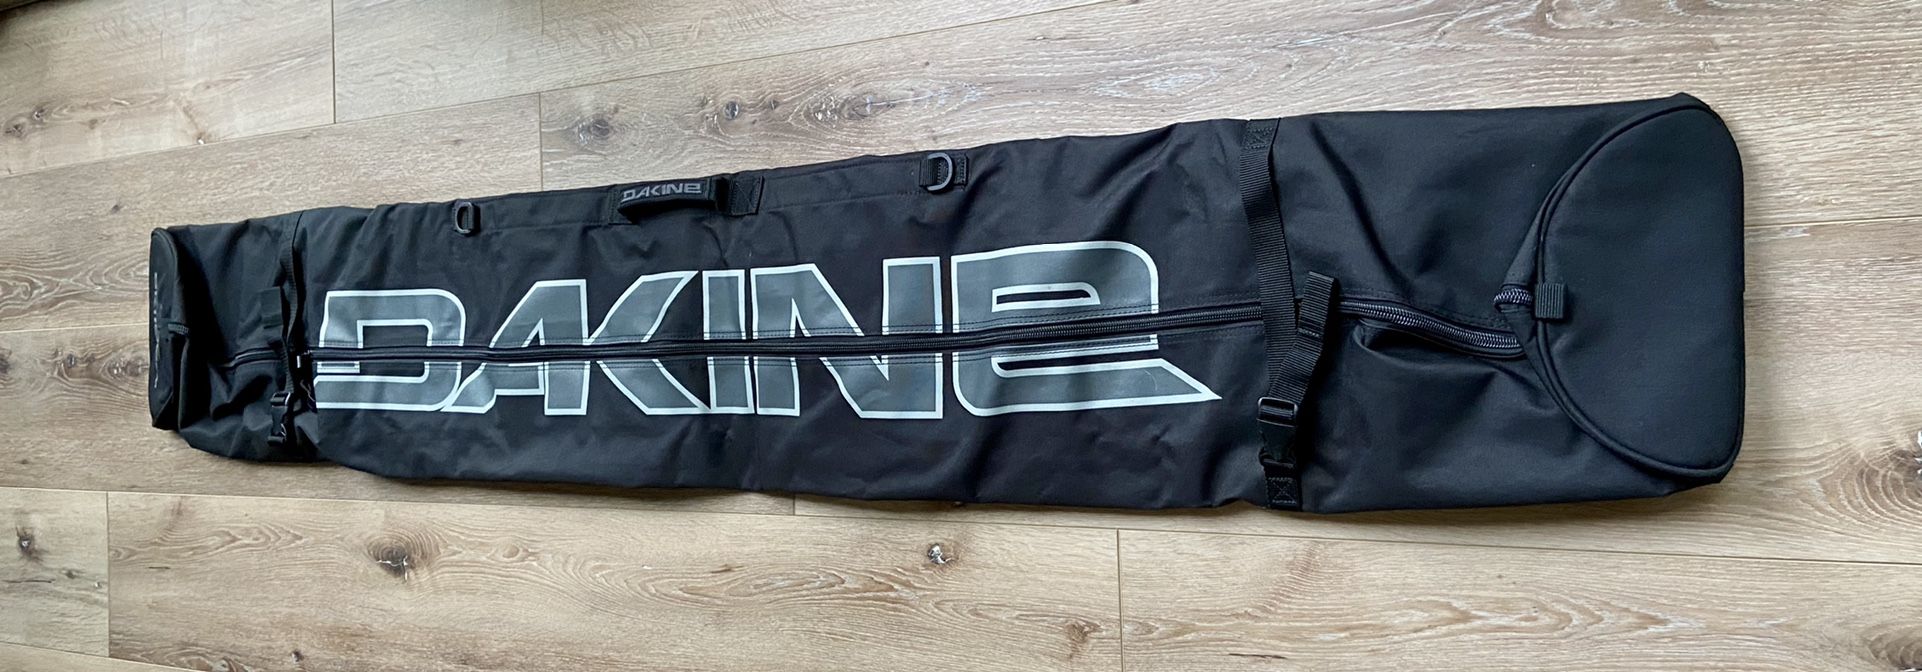 New Dakine Ski/Snowboard Travel Bag 185cm Black Padded Winter Used On Movie Set as Set Dressing/Prop only.   Please look at the photos carefully as th